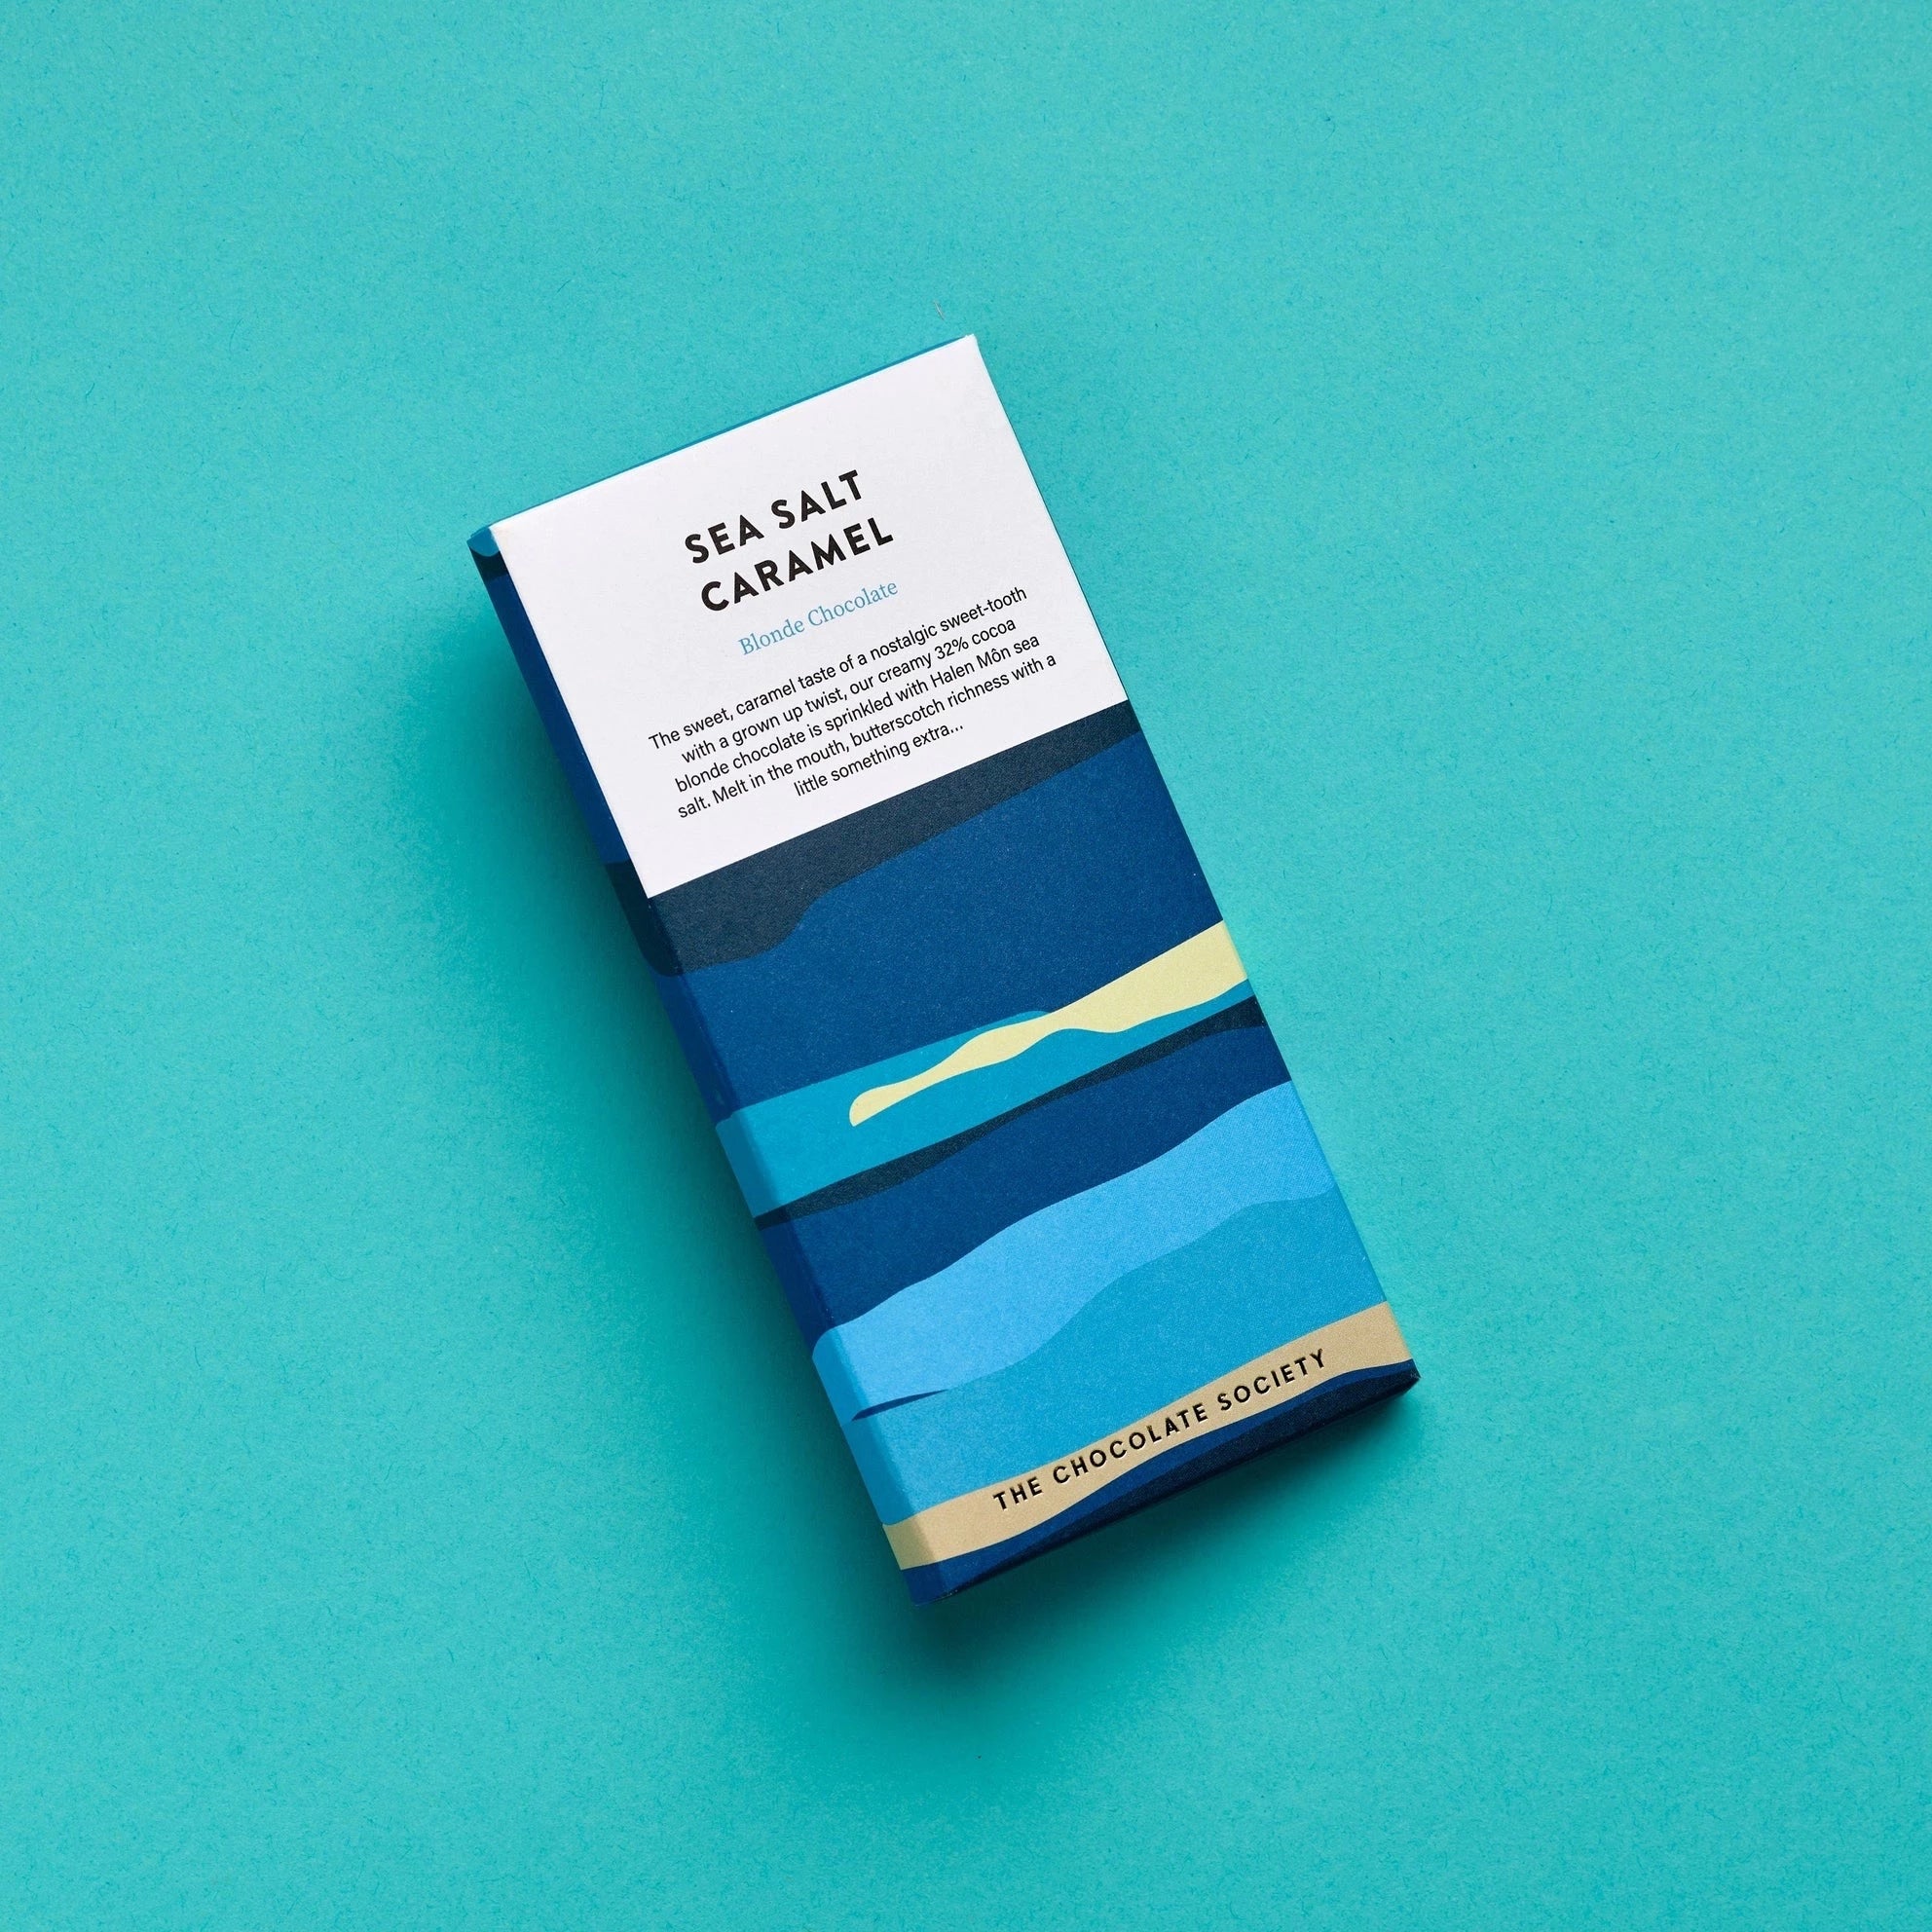 rectangular chocolate bar with blue gradient at the bottom